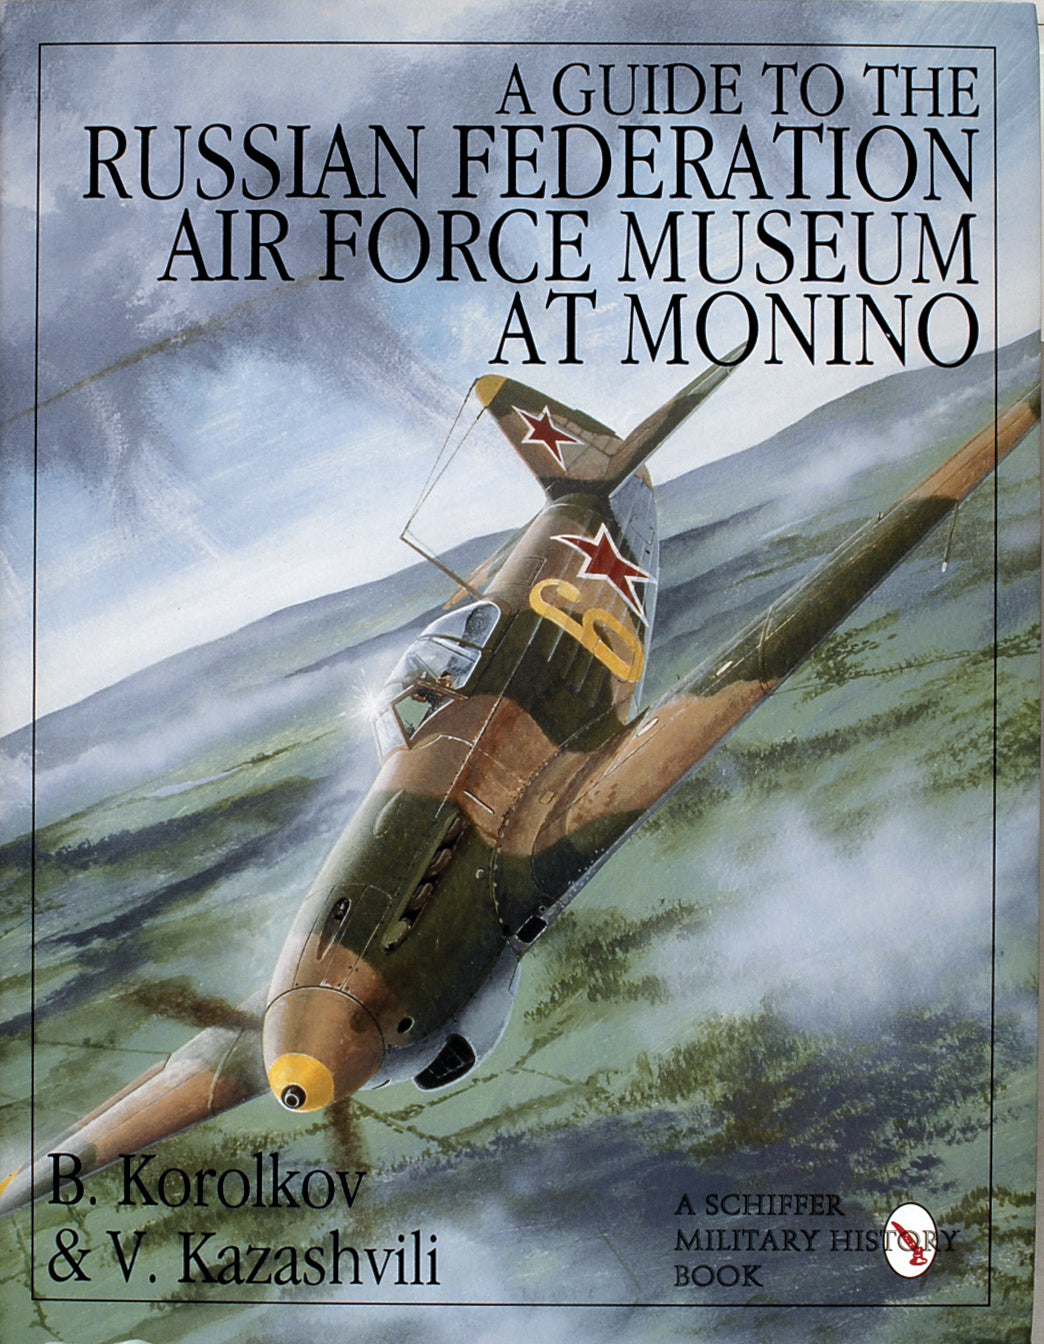 A Guide to the Russian Federation Air Force Museum at Monino